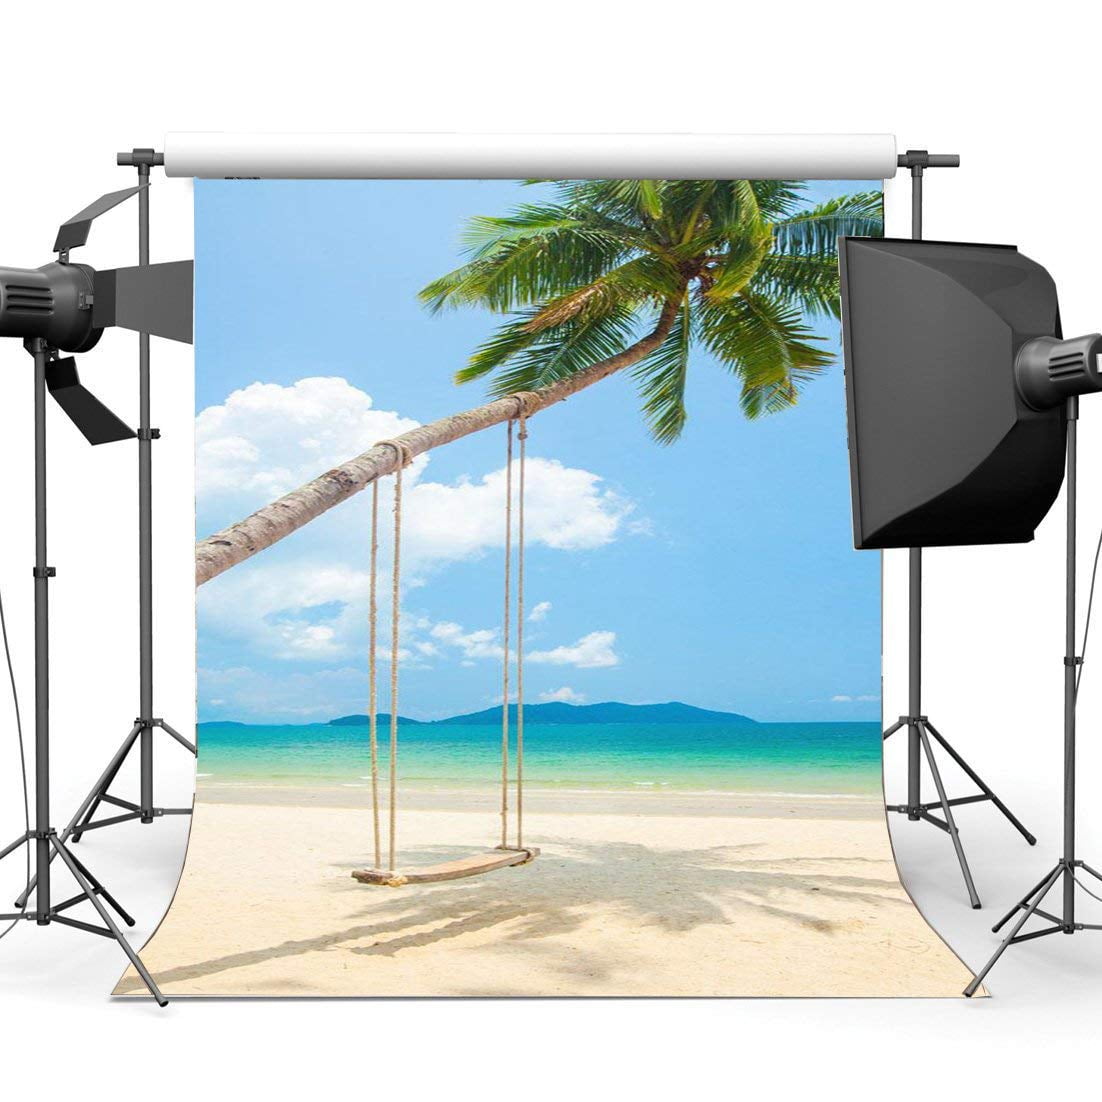 Travel and Tourism Backdrop 10x7ft Cartoon Seaside Beach Polyester Photography Background Blue Sky Cloud Red Car Surfboard Bike Boat Swim Coconut Tree Mountain Portrait Shoot Decor Prop Banner